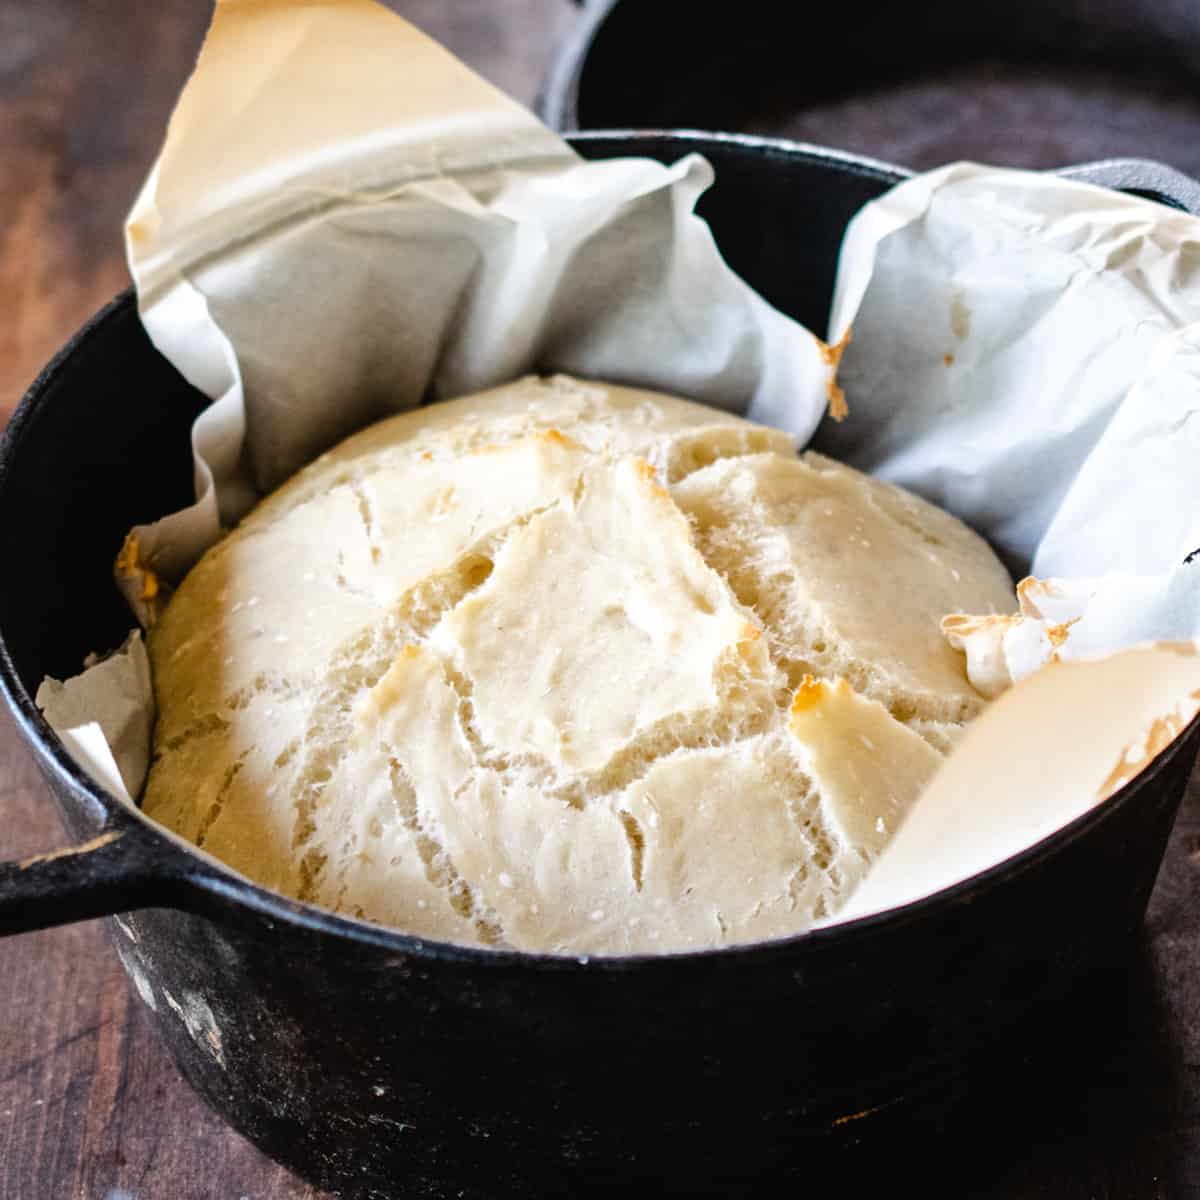 Par cooked loaf of artisan bread in a cast iron handled Dutch oven lined with parchment paper.